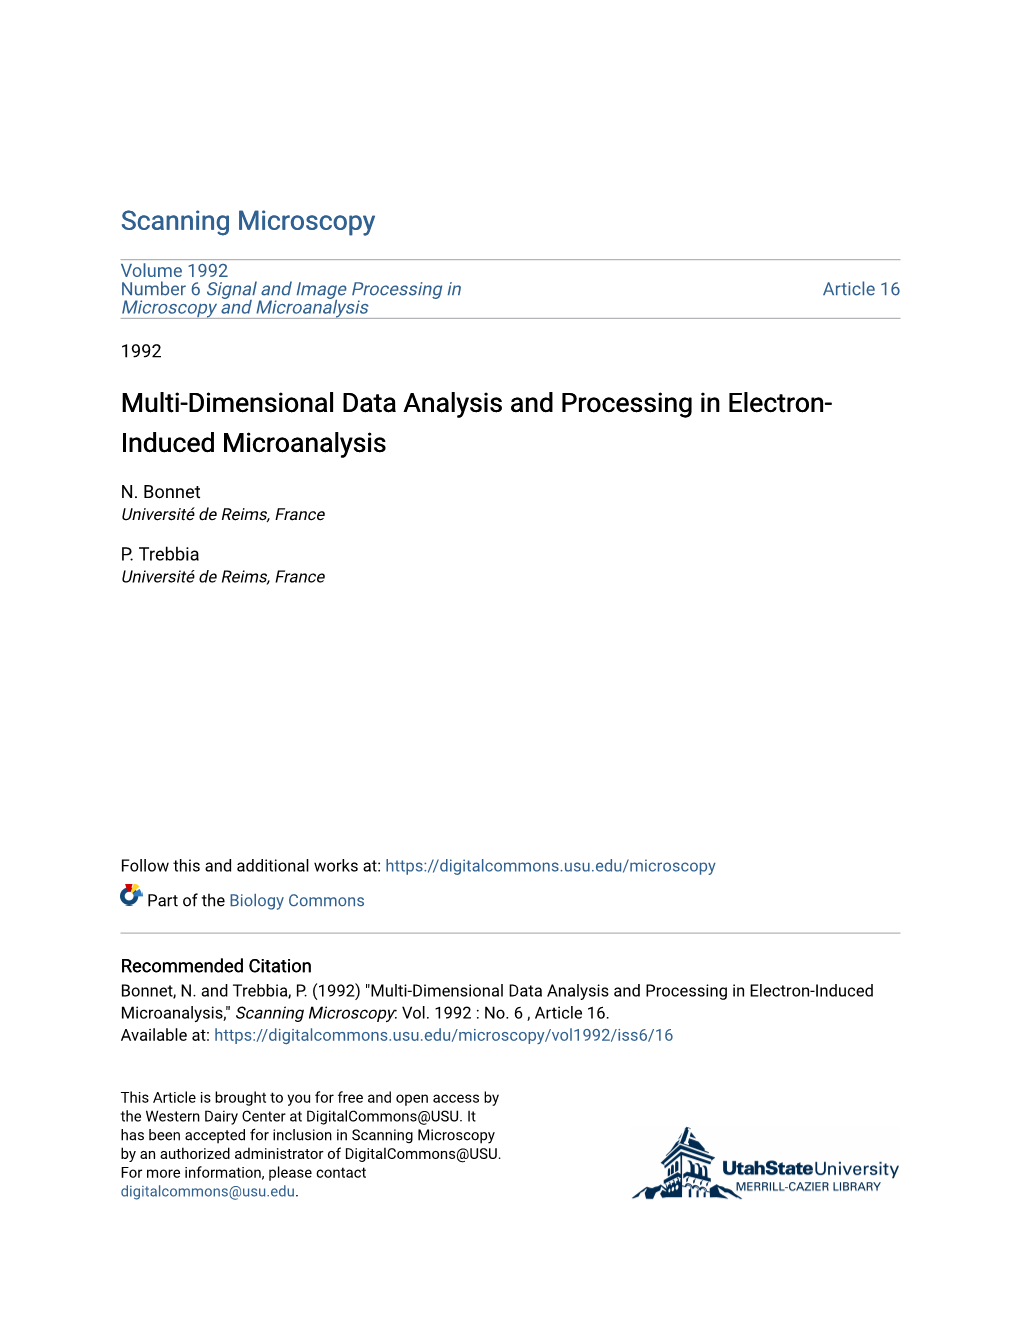 Multi-Dimensional Data Analysis and Processing in Electron-Induced Microanalysis," Scanning Microscopy: Vol